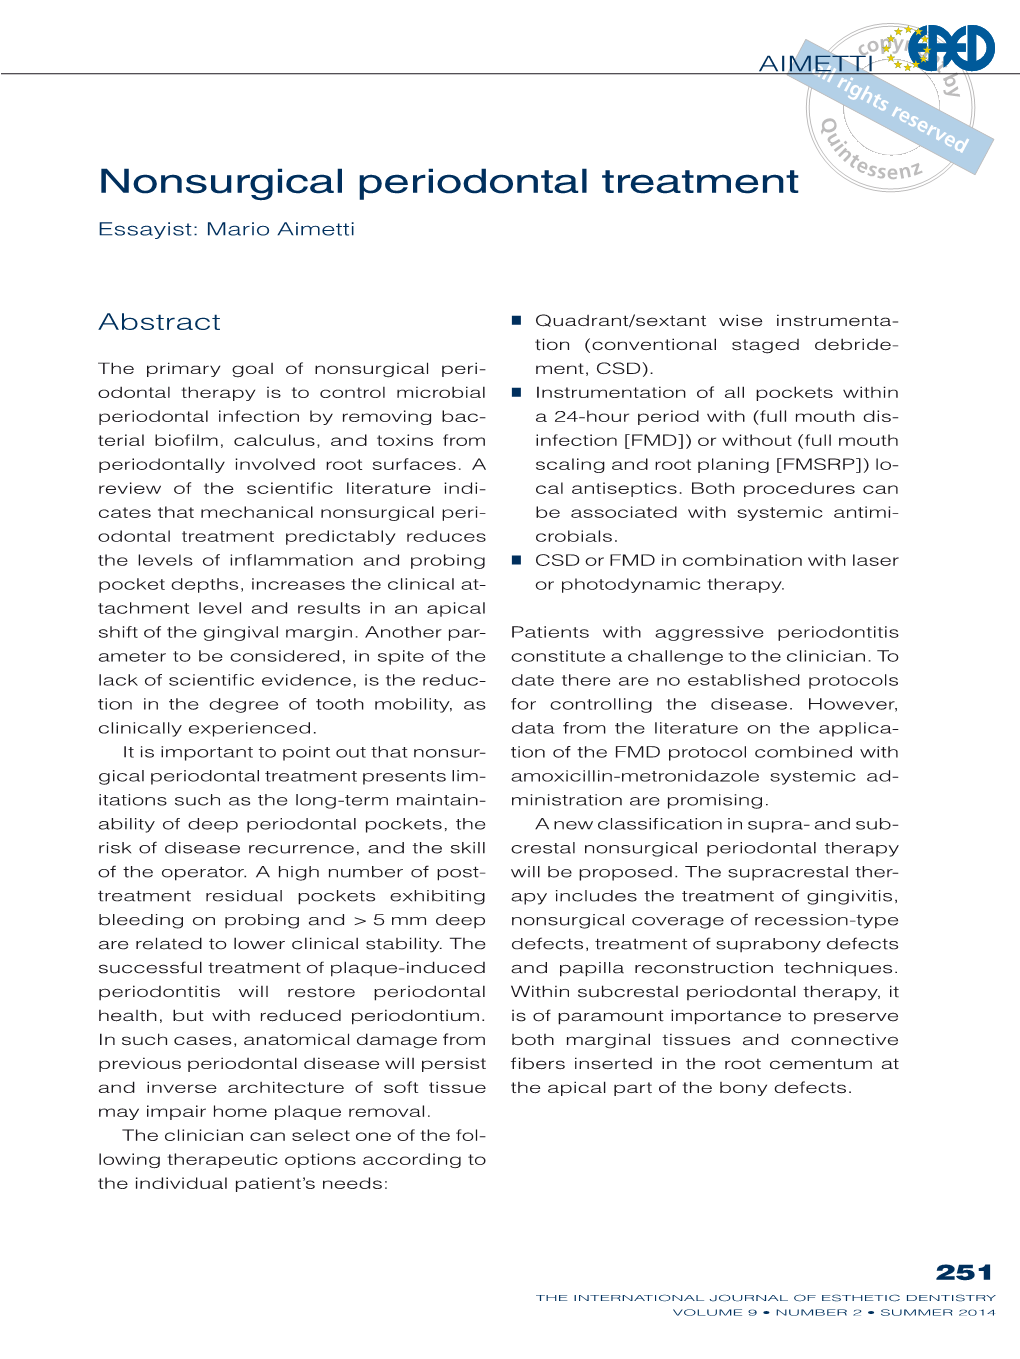 Nonsurgical Treatment